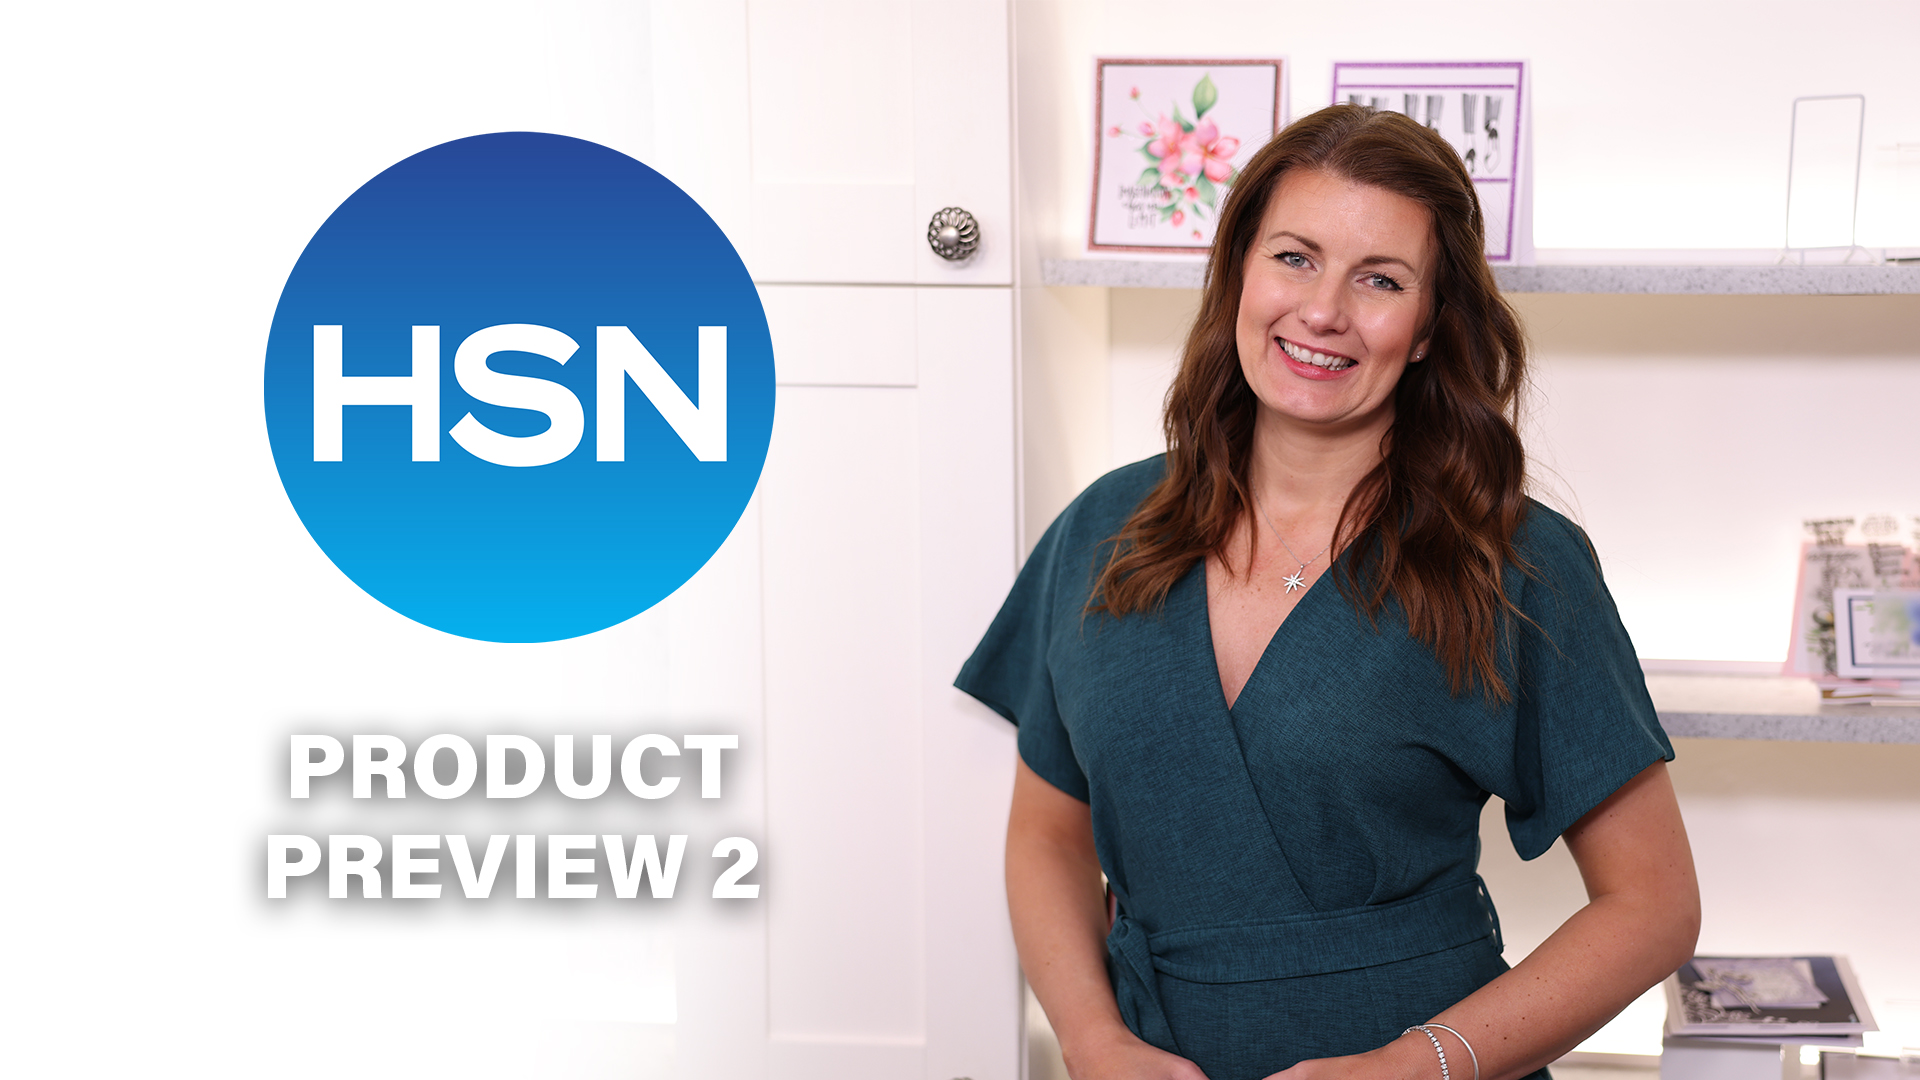 hsn-show-may-3rd-product-preview-2---join-toni-for-her-latest-products-coming-to-hsn---broadcast-30th-april-22